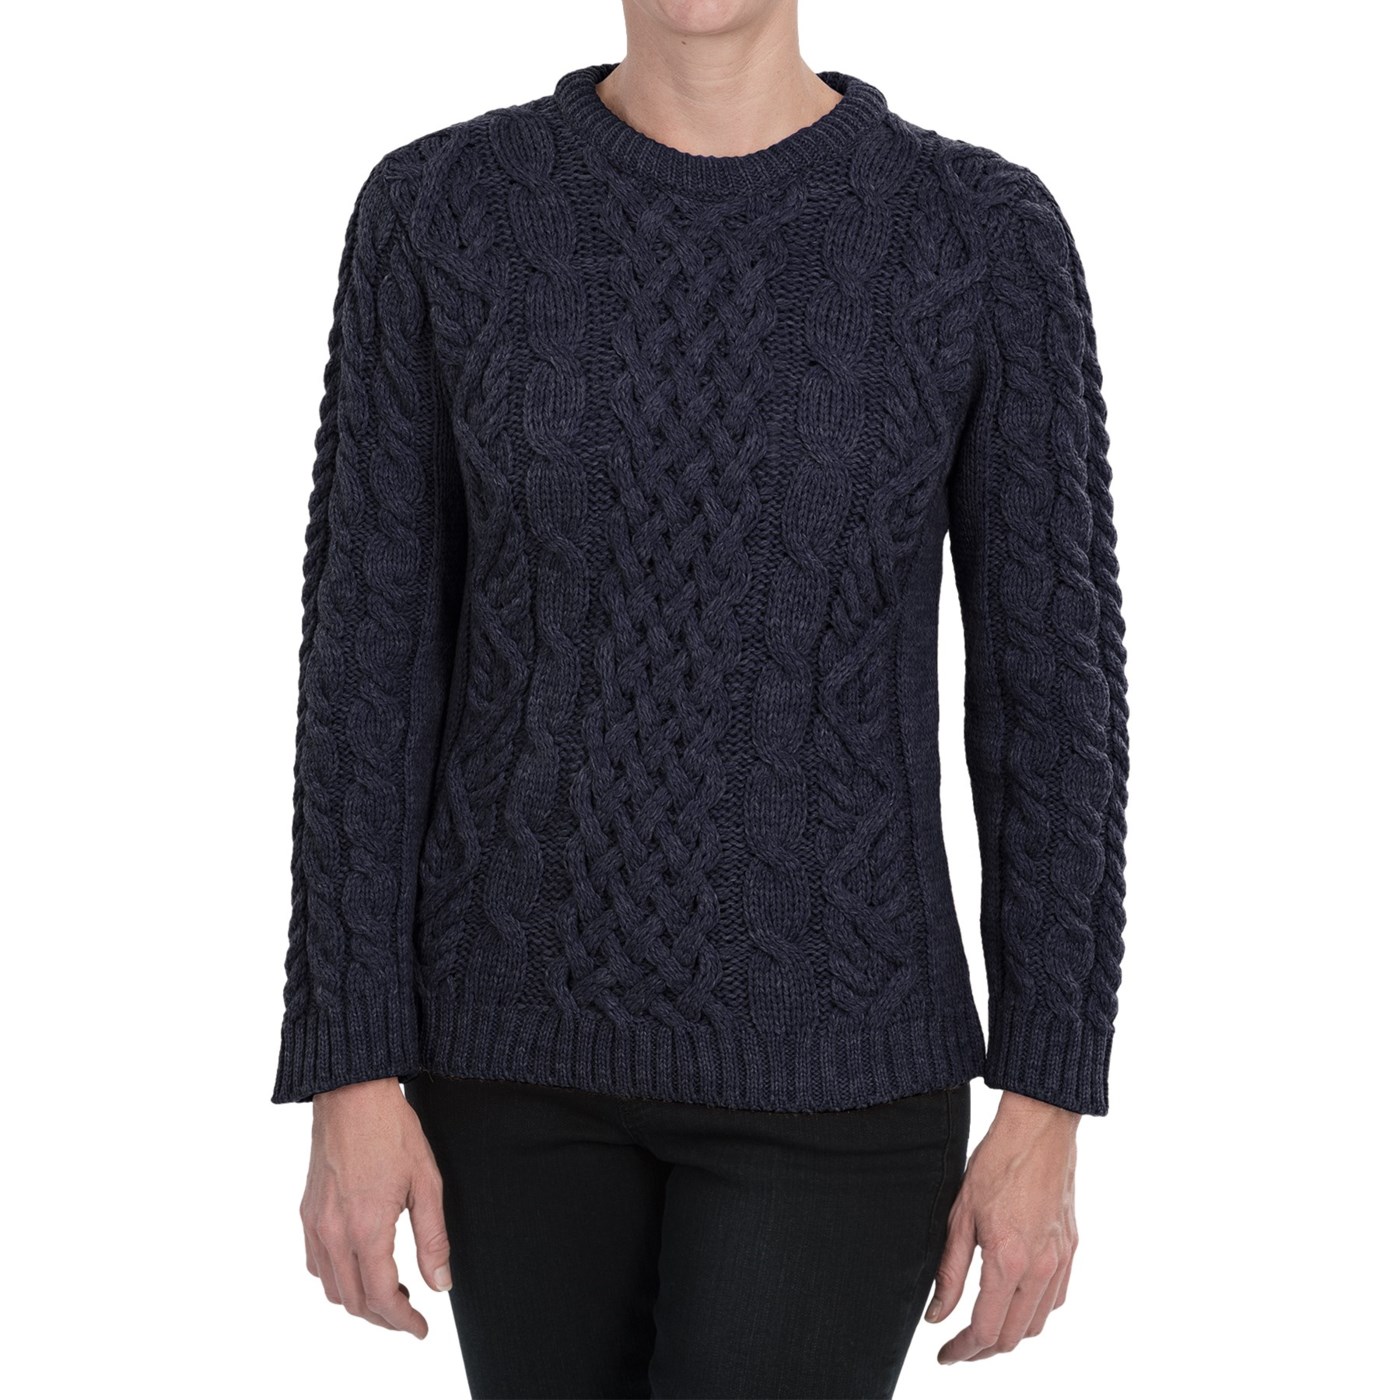 Peregrine by J.G. Glover Aran Cable Knit Sweater (For Women) 65